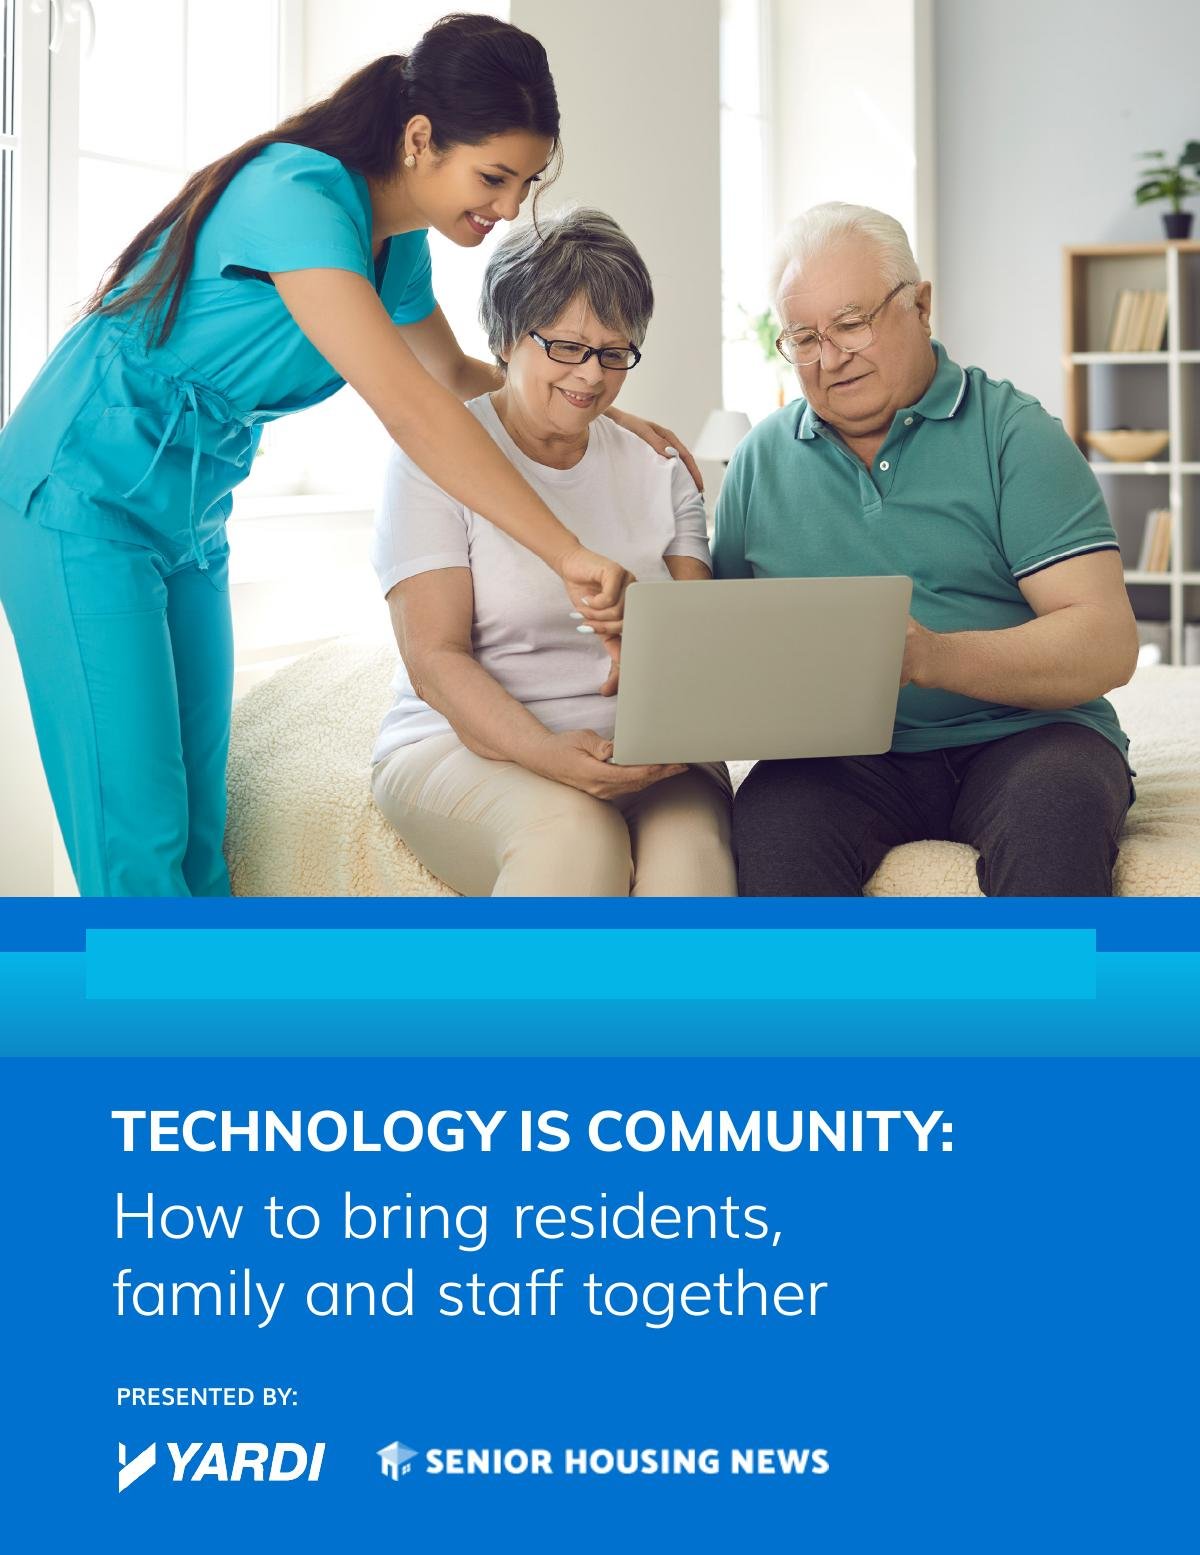 TECHNOLOGY IS COMMUNITY: How to bring residents, family and staff together